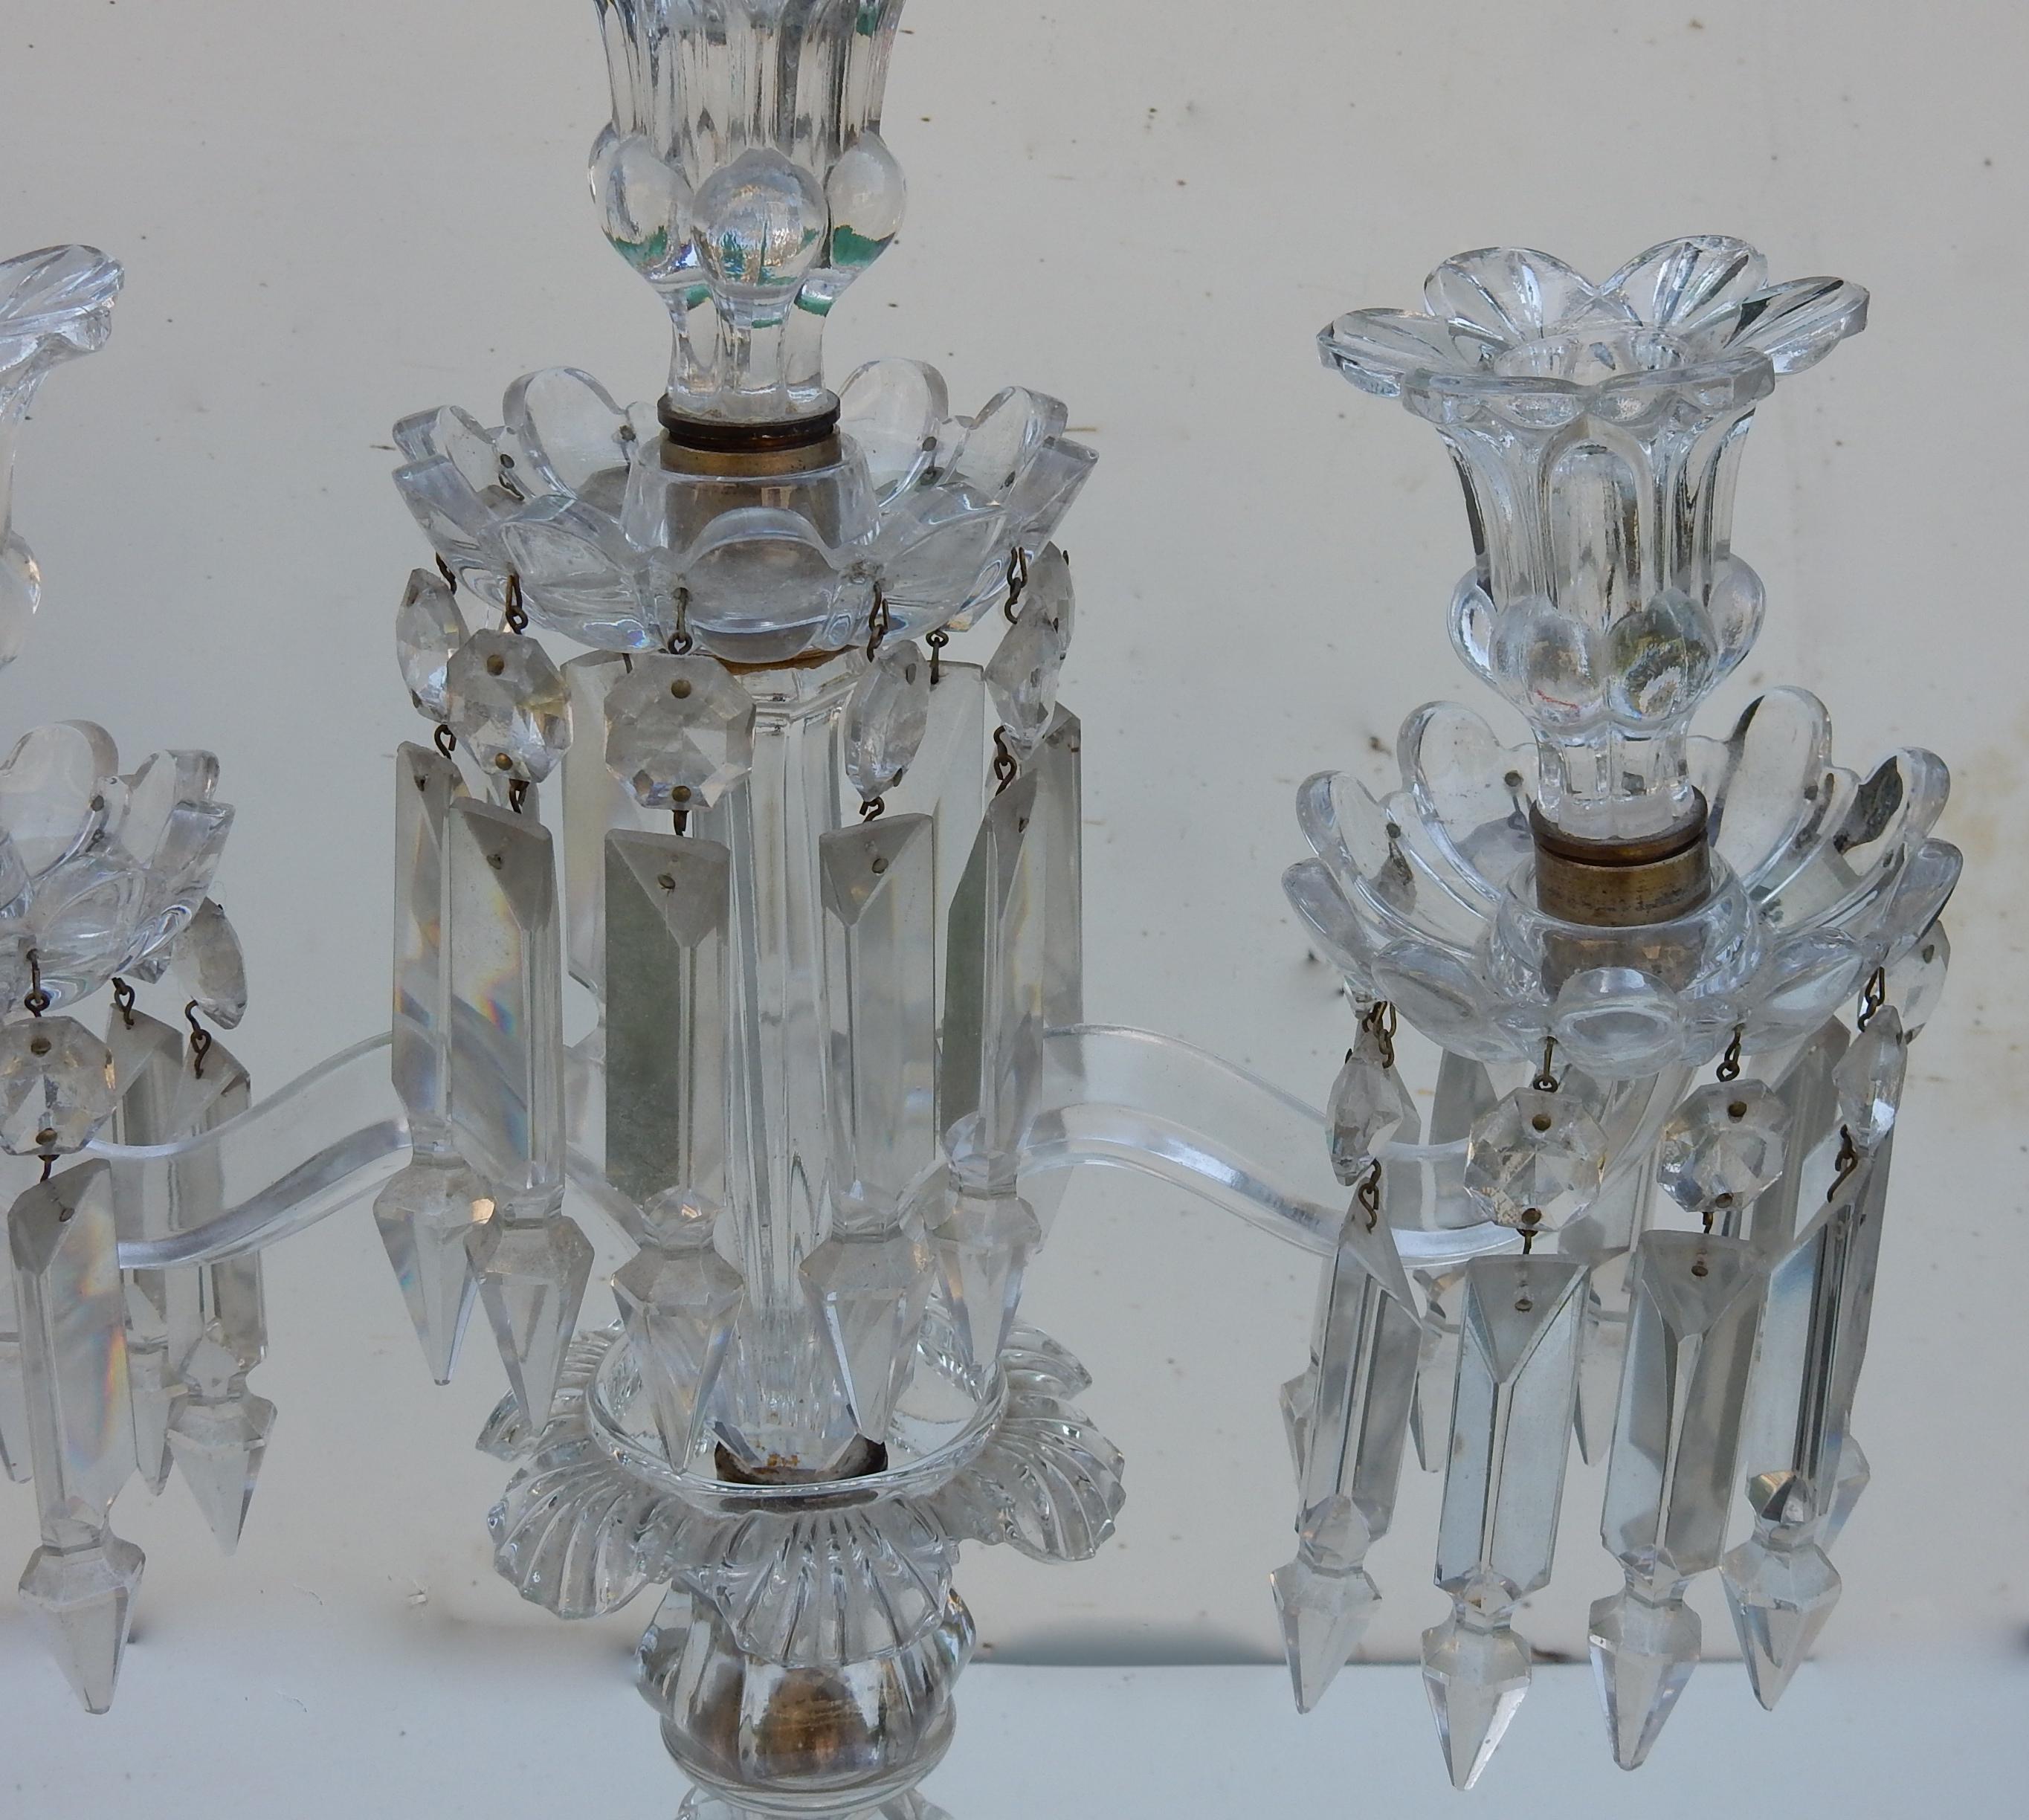 Pair of crystal candlesticks with 2 arms with prismatic pendants with a step to end in a point, round base decorated with bumps and round pearls. Signed Baccarat
Good condition.